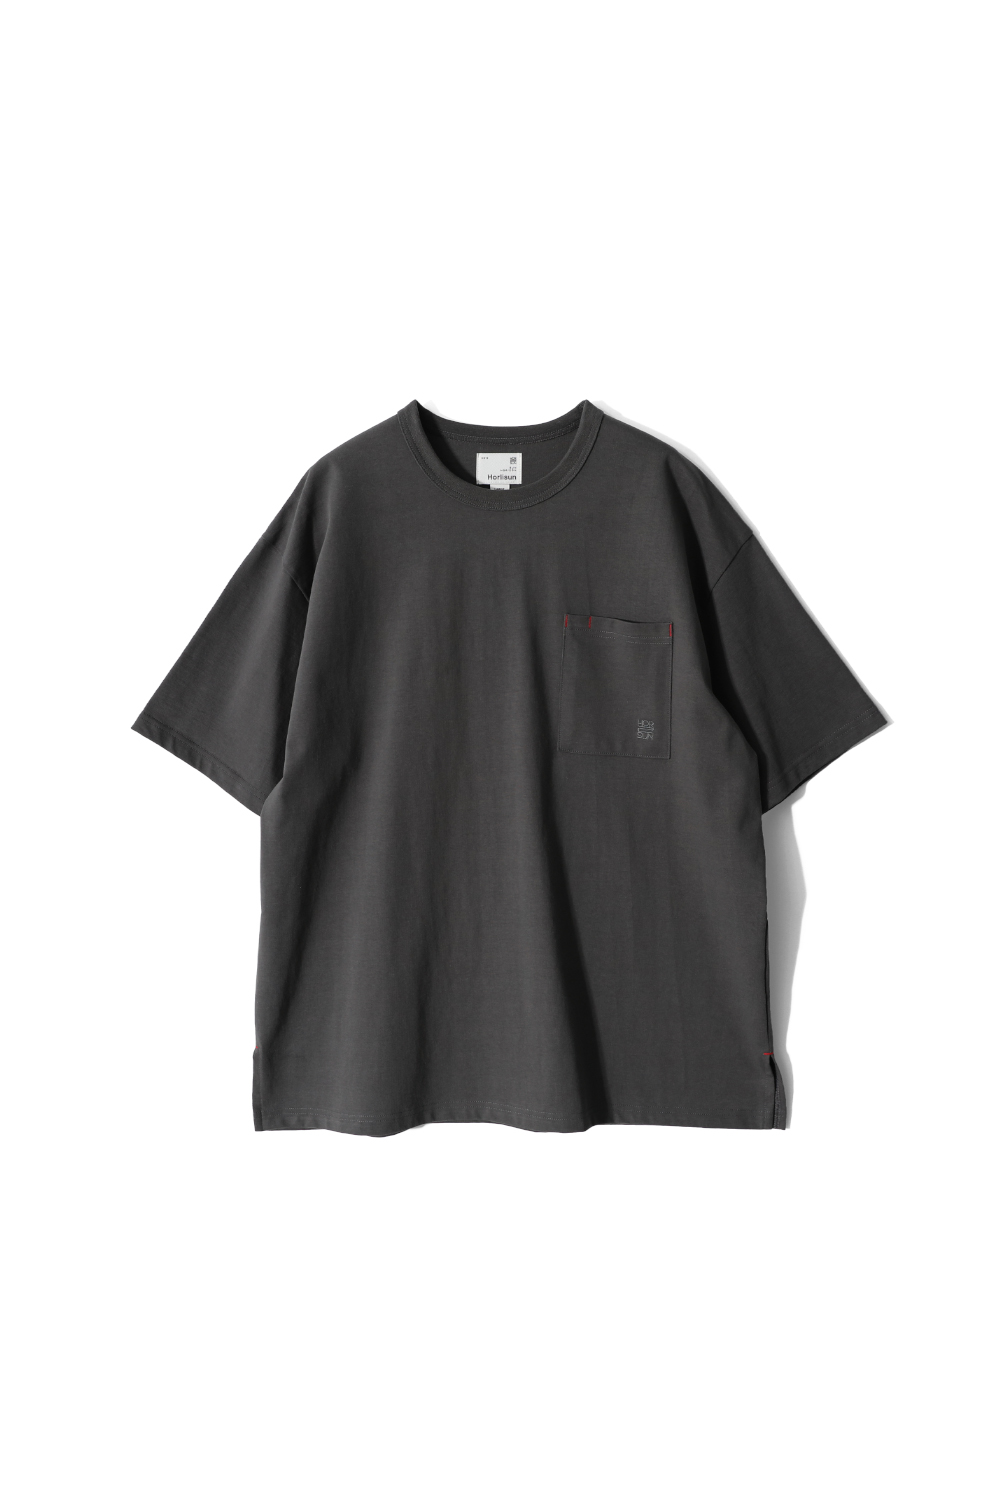 Lawrence Short Sleeve T-shirt Charcoal